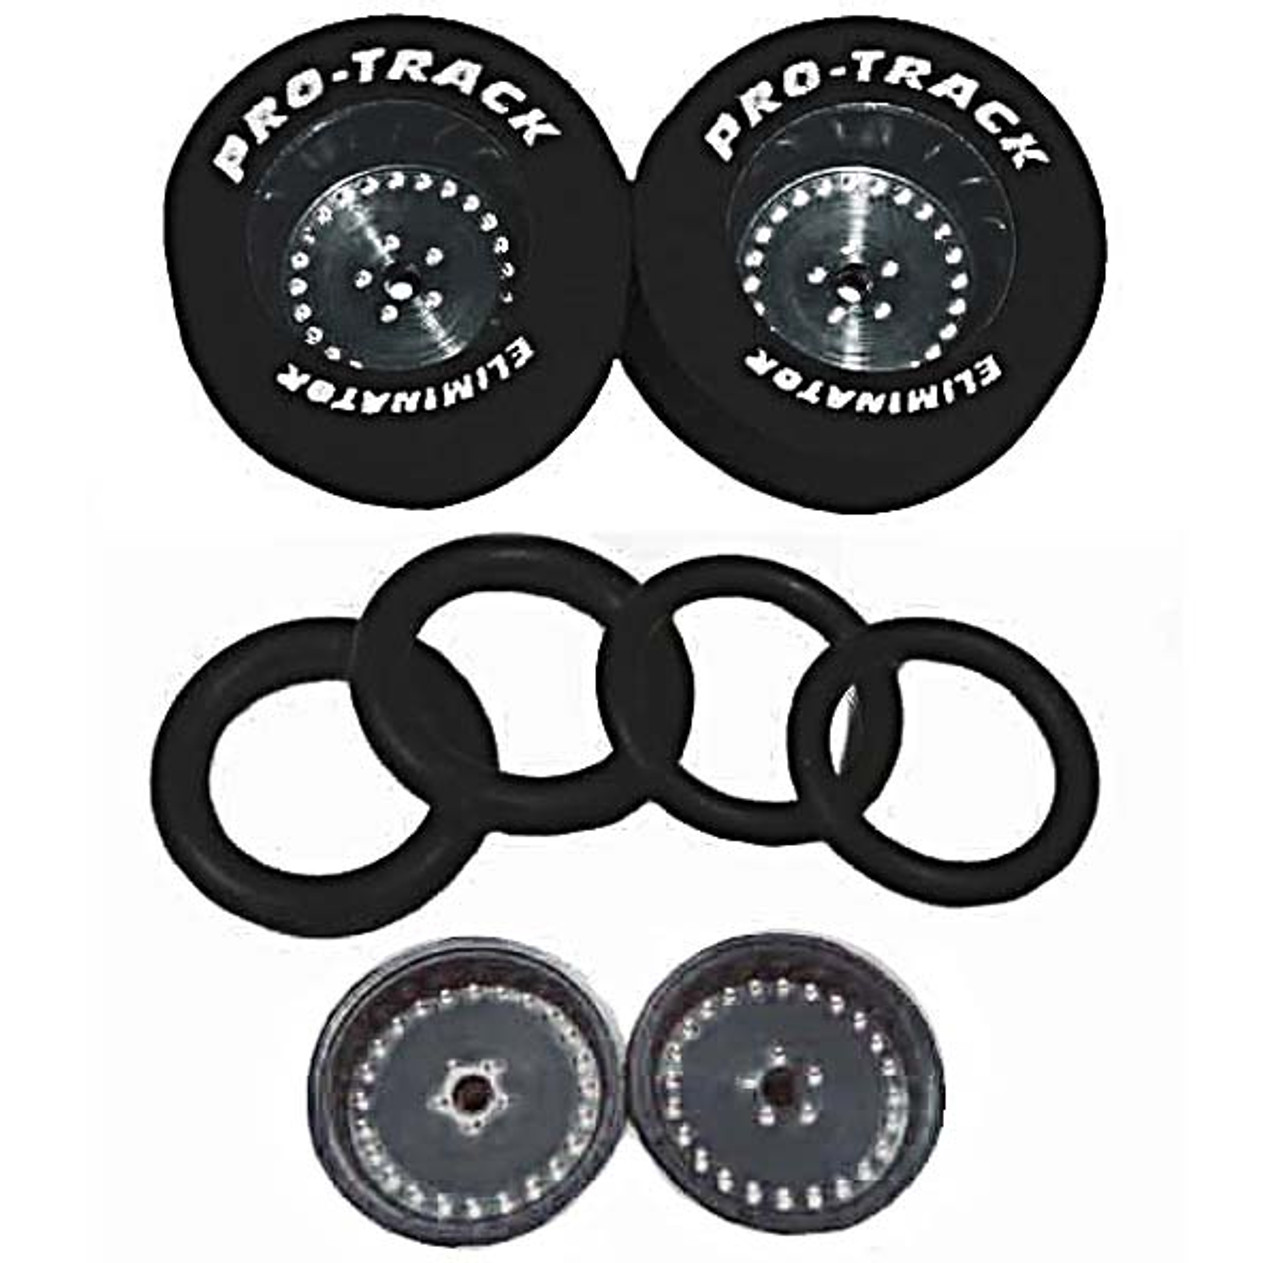 Pro-Track 1 3/16 x 3/32 x .435 wide Rears & Fronts Style G Gun Metal Grey N405G-GM-SET